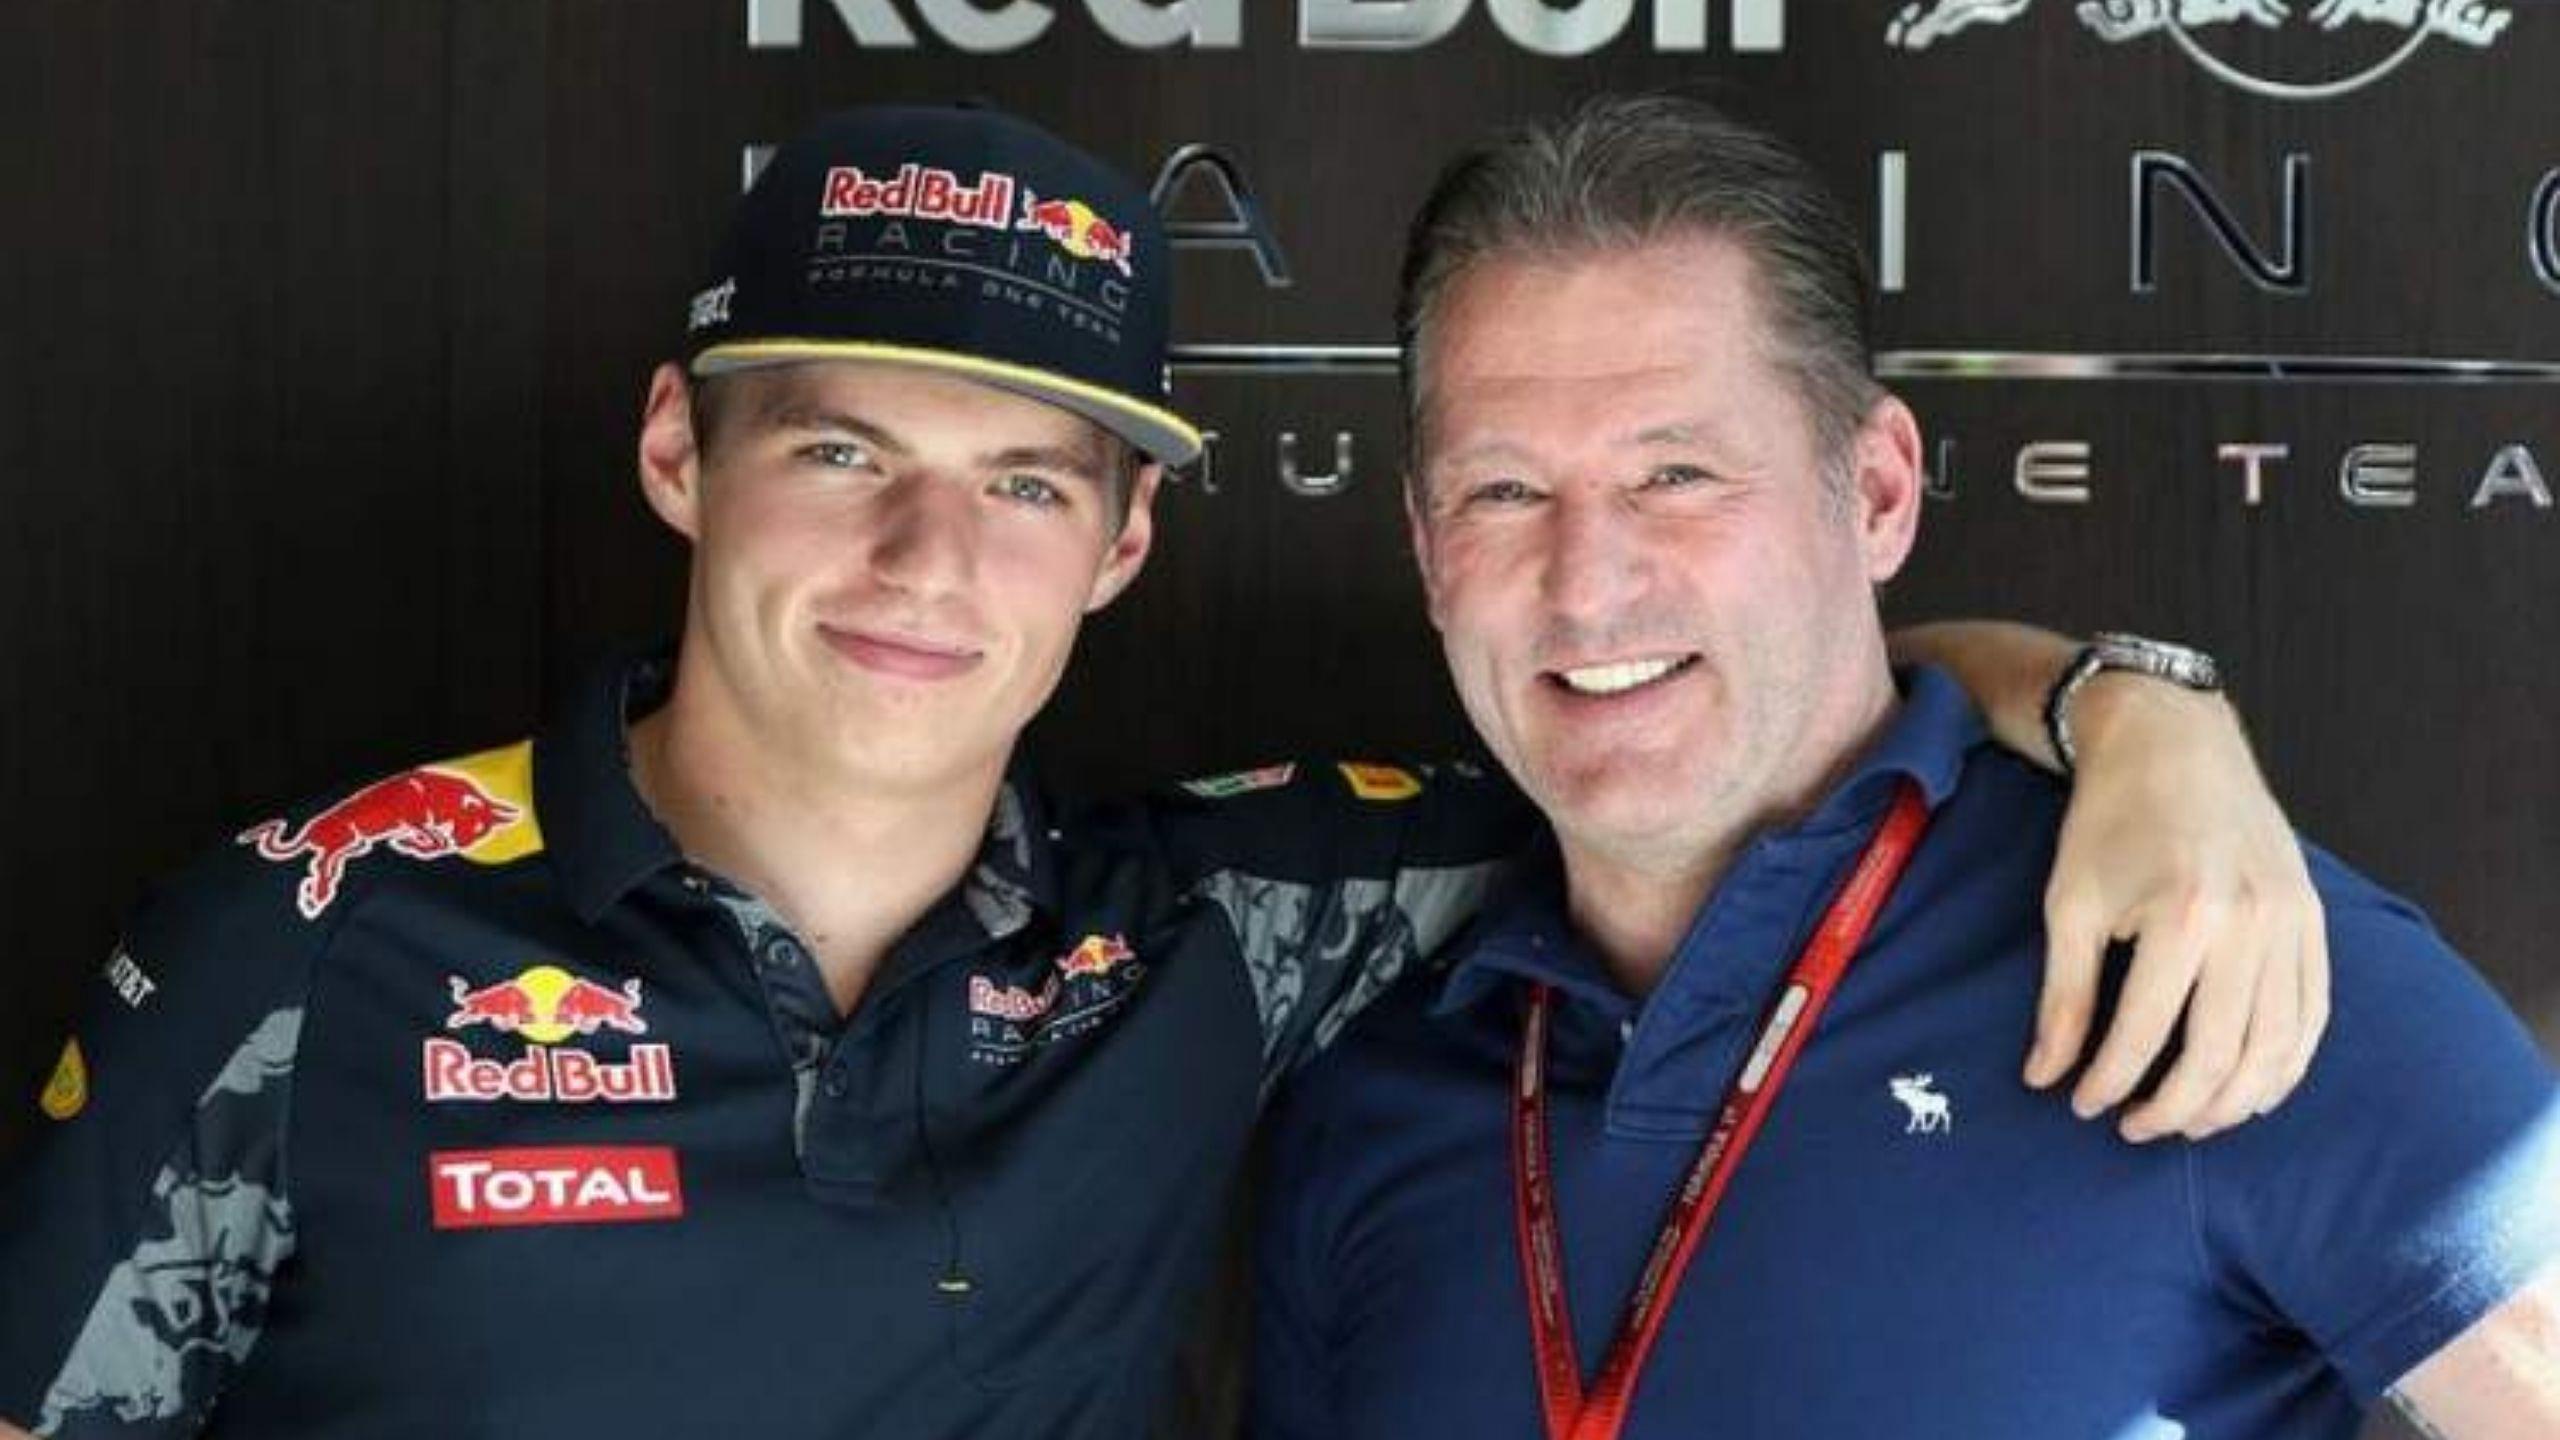 "He is still fast" - Max Verstappen reveals his wish of wanting to drive with his father Jos as a team